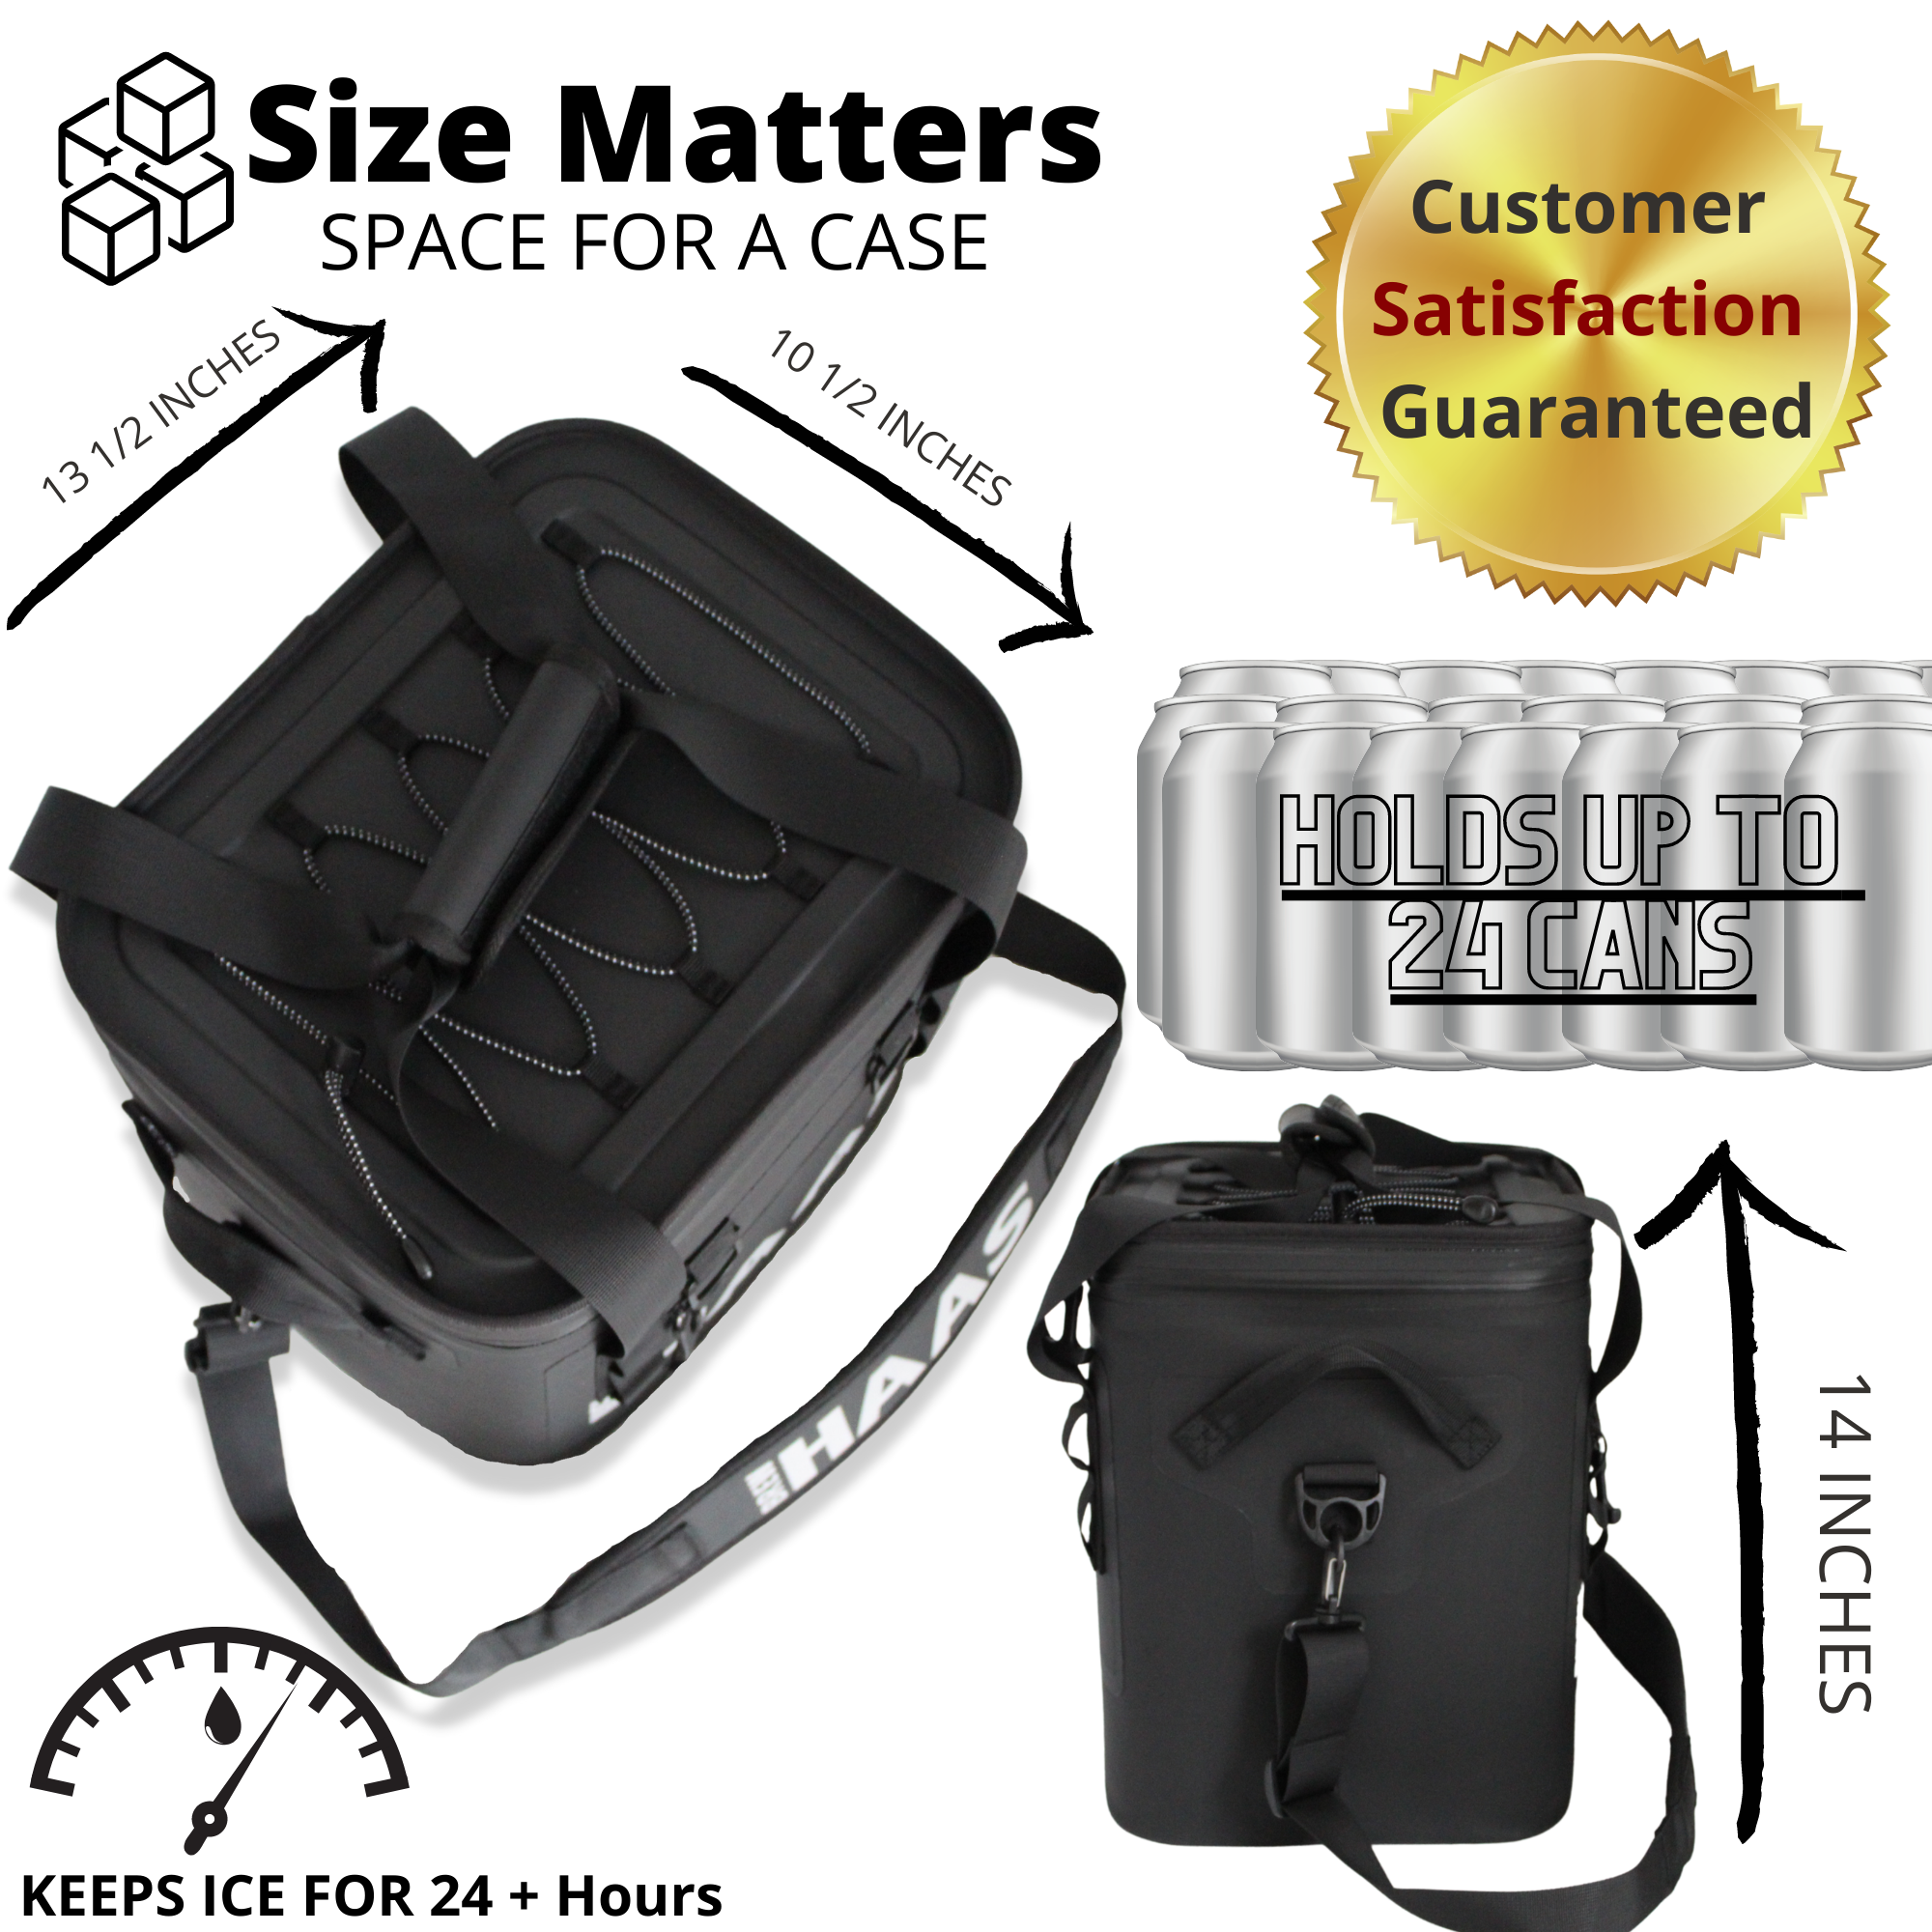 THE SUITCASE Soft Sided Cooler - 24 Cans